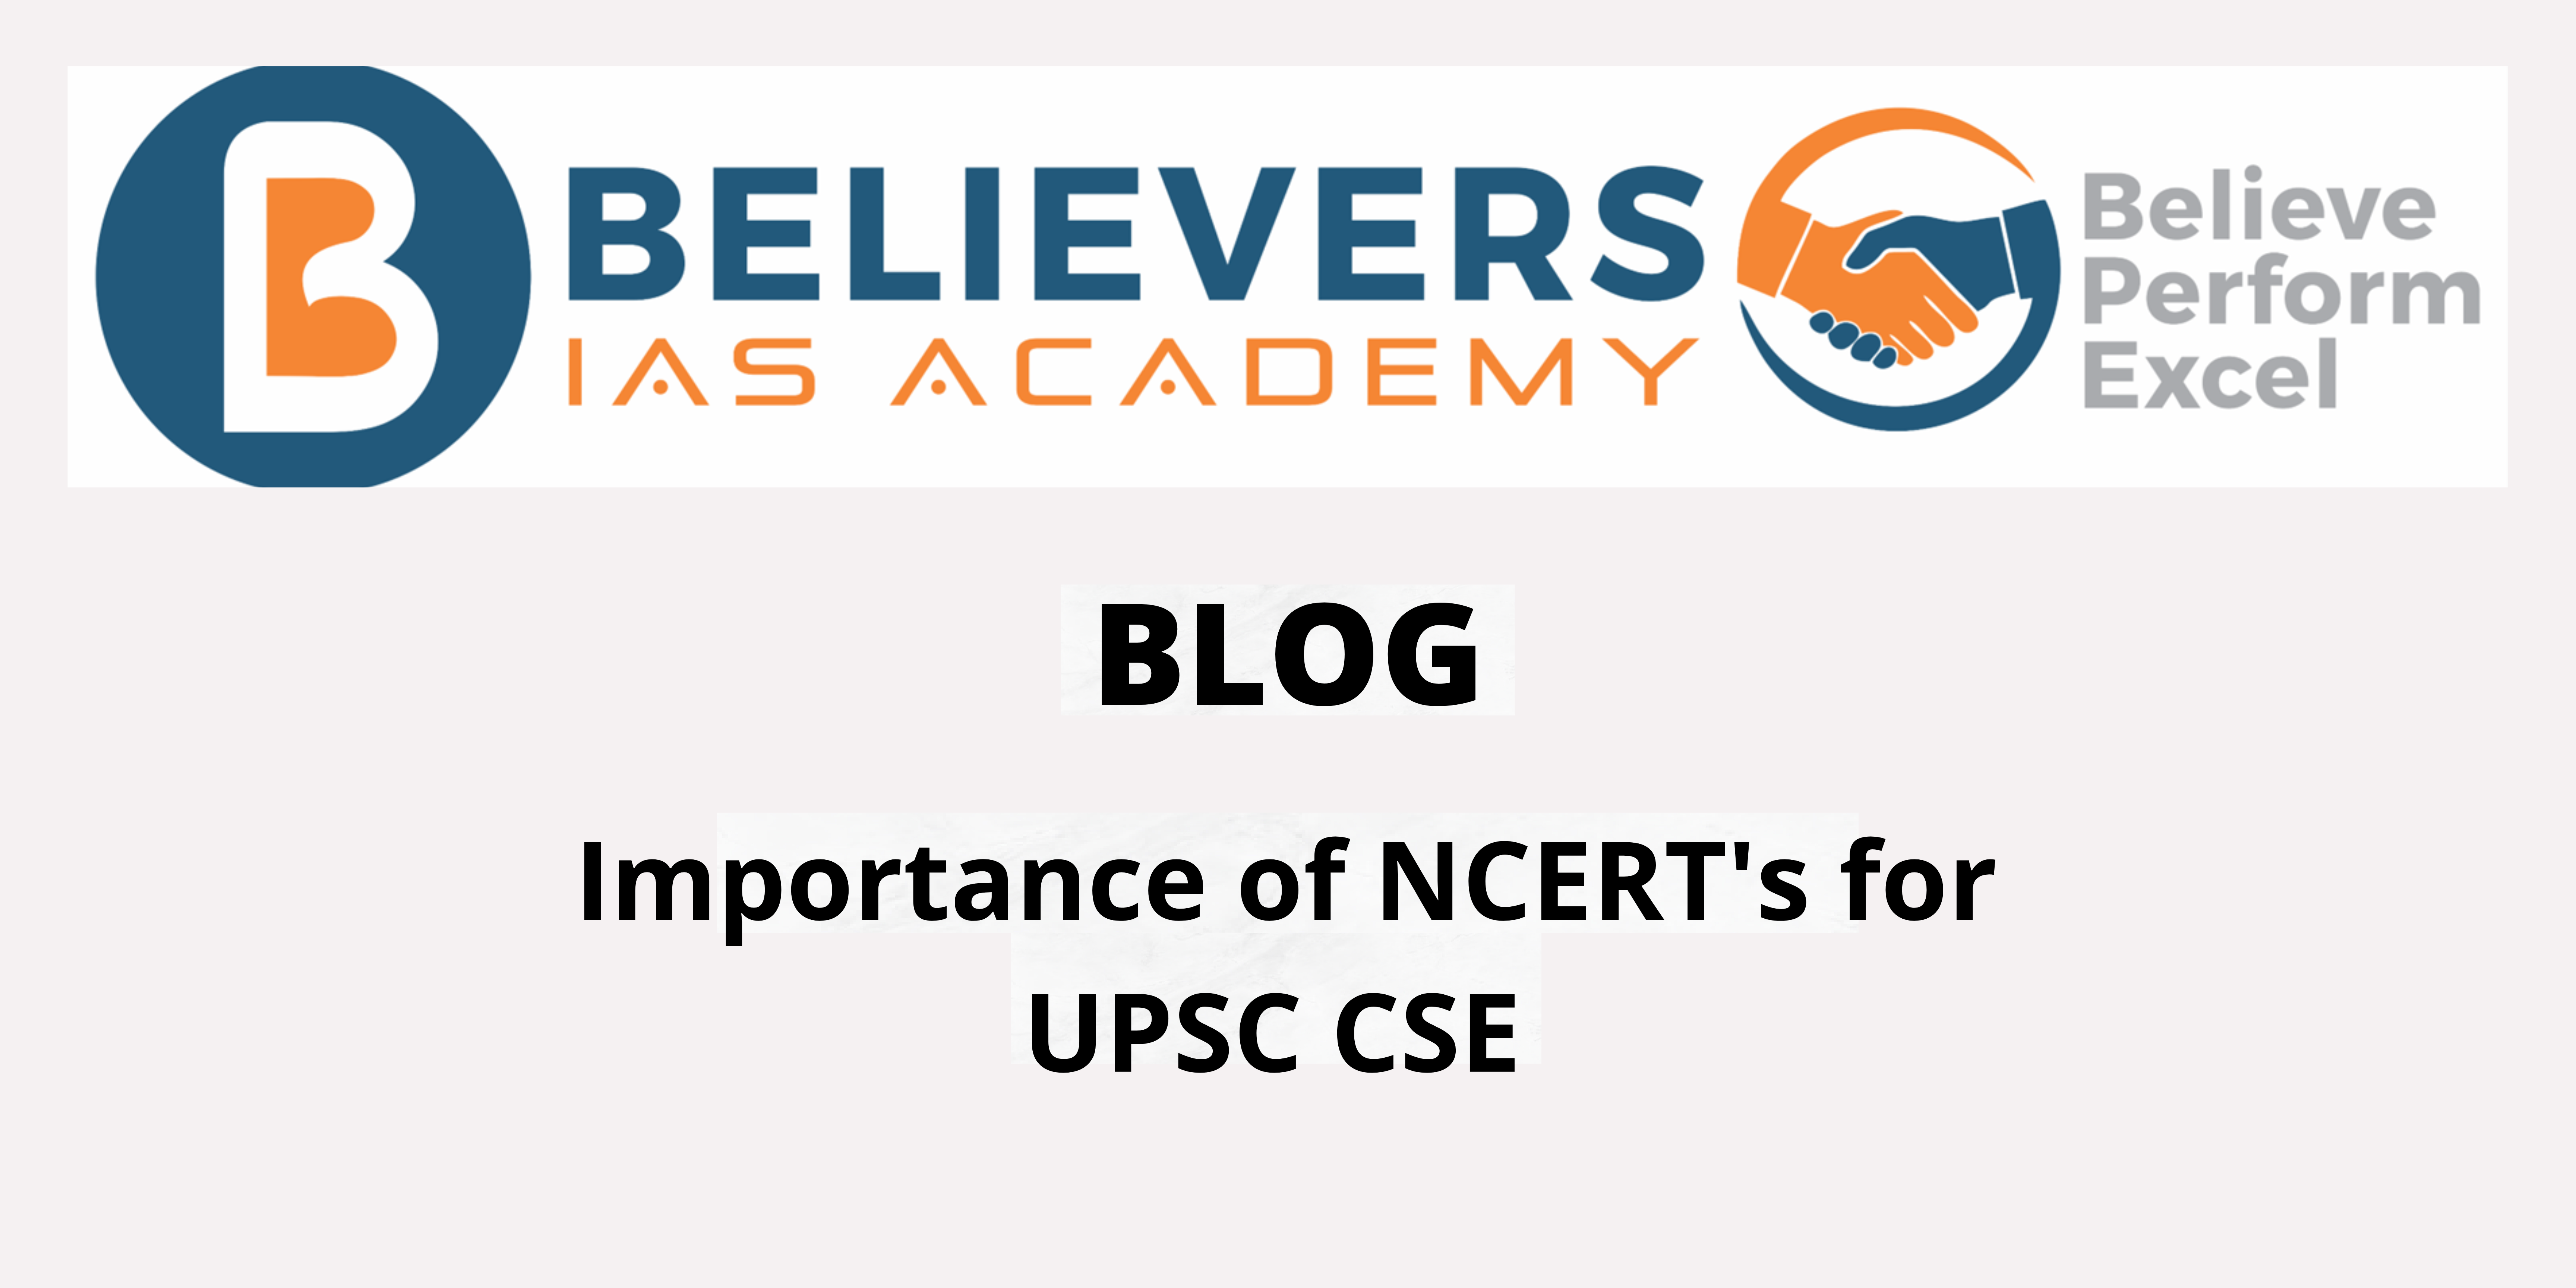 Importance of NCERT's for UPSC CSE